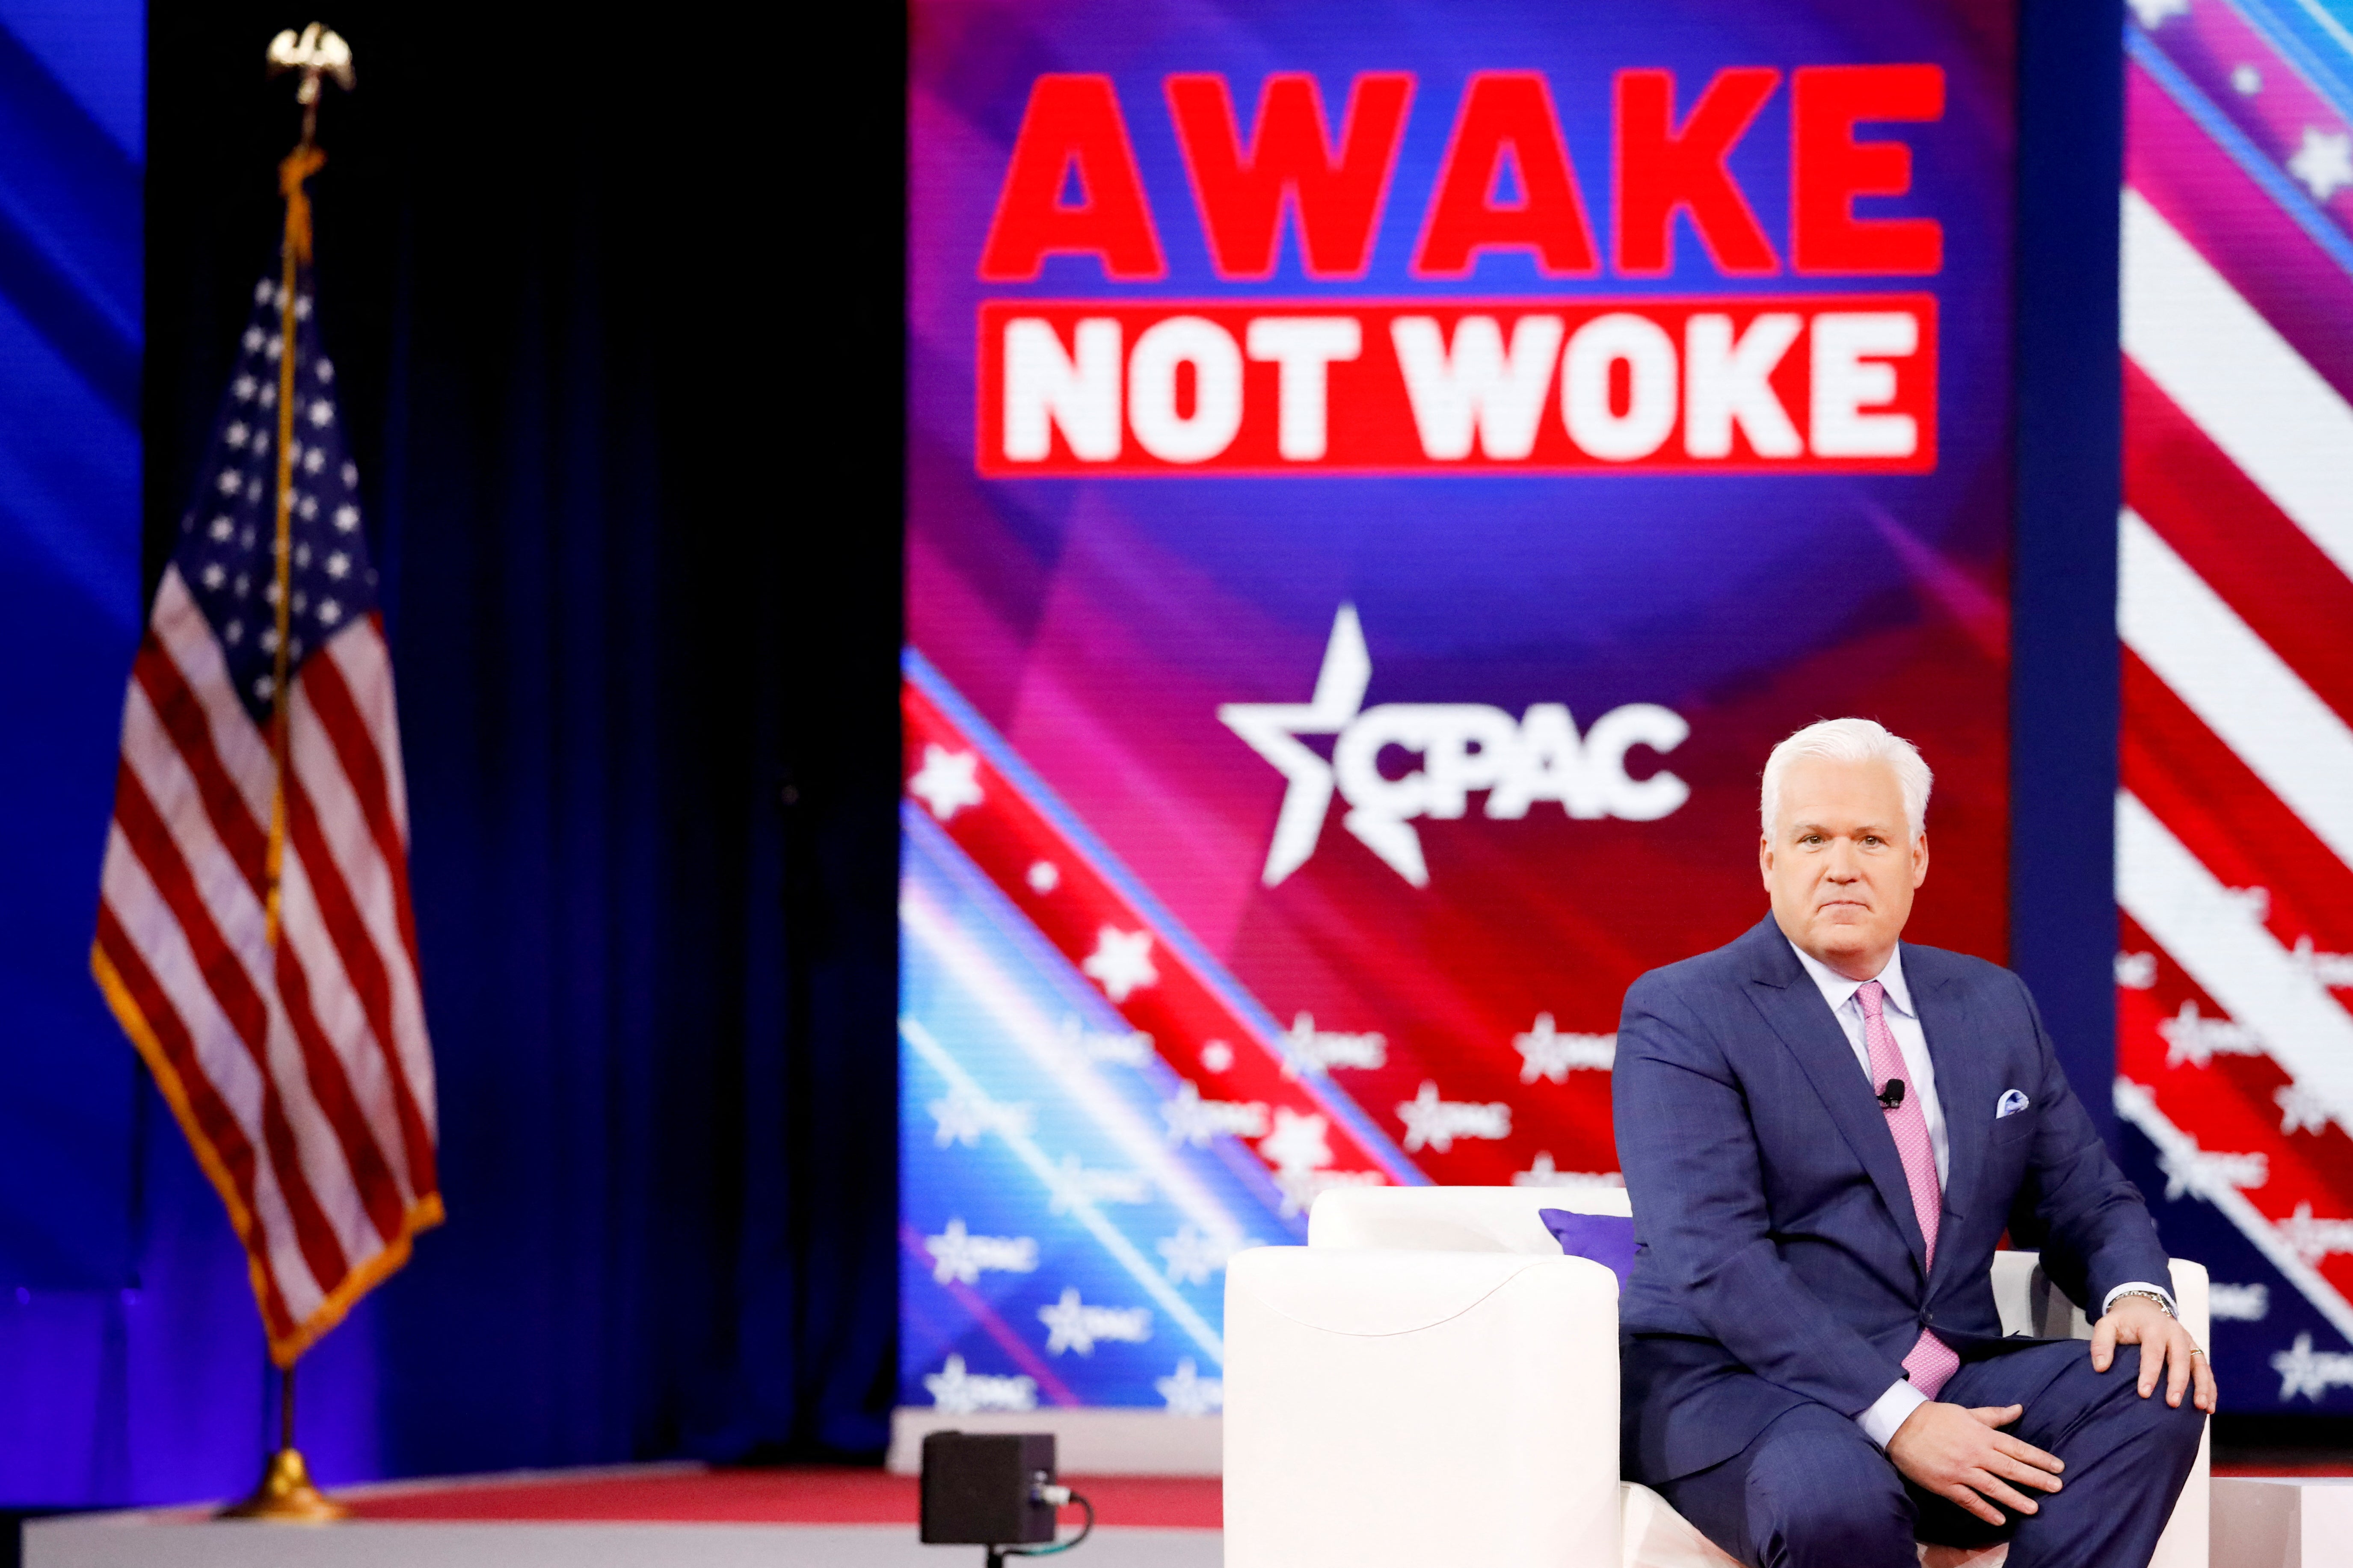 Matt Schlapp, Chairman of the American Conservative Union, looks on as he takes part in a panel discussion at the Conservative Political Action Conference (CPAC) in Orlando, Florida, U.S. February 25, 2022. REUTERS/Marco Bello